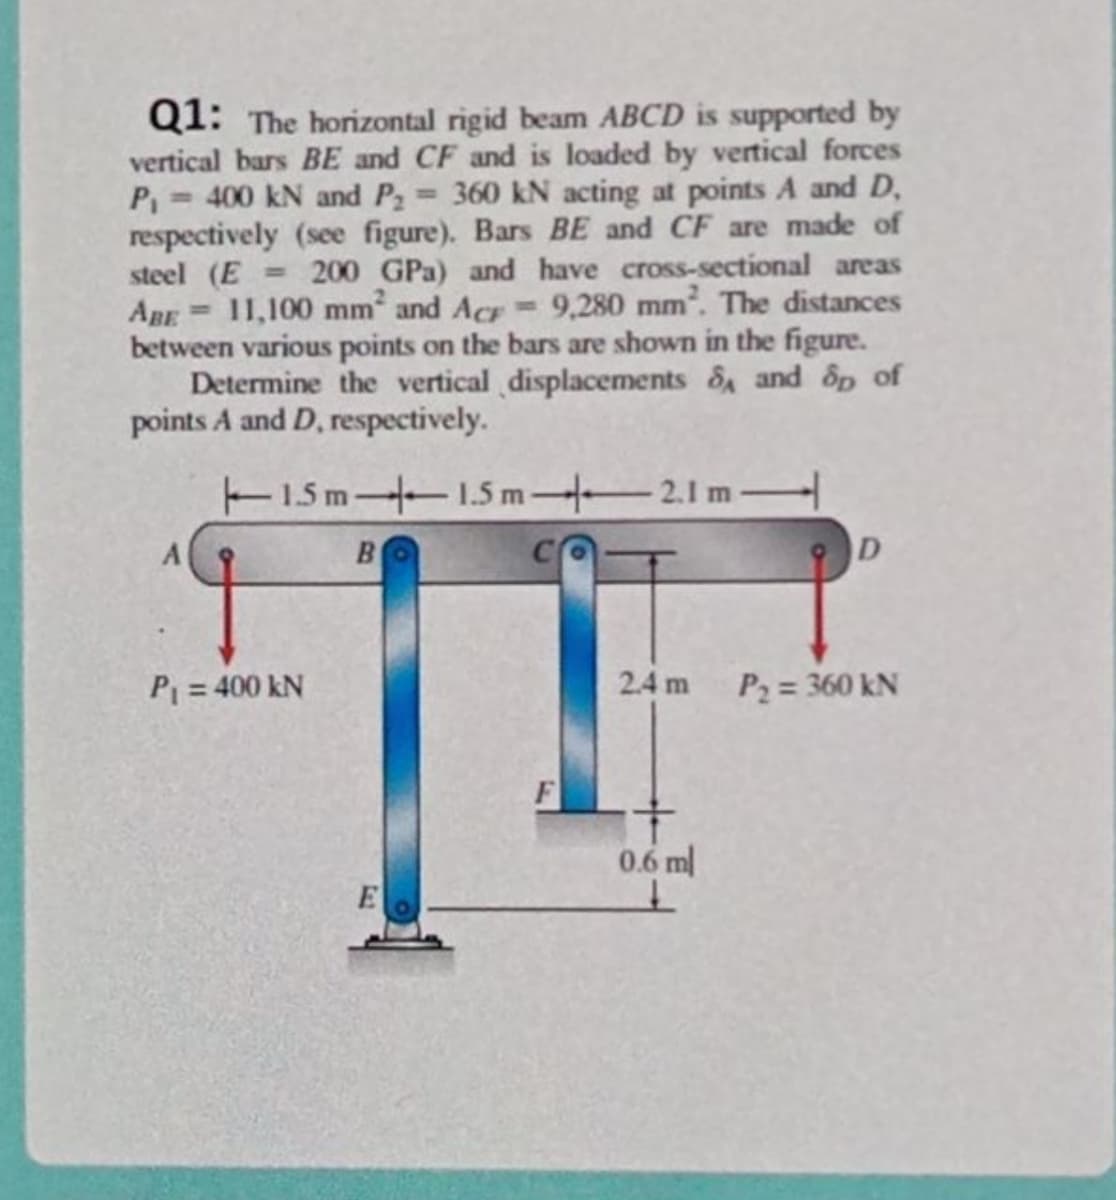 Q1: The horizontal rigid beam ABCD is supported by
vertical bars BE and CF and is loaded by vertical forces
P 400 kN and P2
respectively (see figure). Bars BE and CF are made of
steel (E
ABE
between various points on the bars are shown in the figure.
Determine the vertical displacements & and dp of
points A and D, respectively.
360 kN acting at points A and D,
%3D
200 GPa) and have cross-sectional areas
11,100 mm and Acr
9,280 mm. The distances
%3D
T5m 1.5 m 2.1 m-
B
D
P = 400 kN
2.4 m
P2 = 360 kN
%3D
0.6 ml
E
